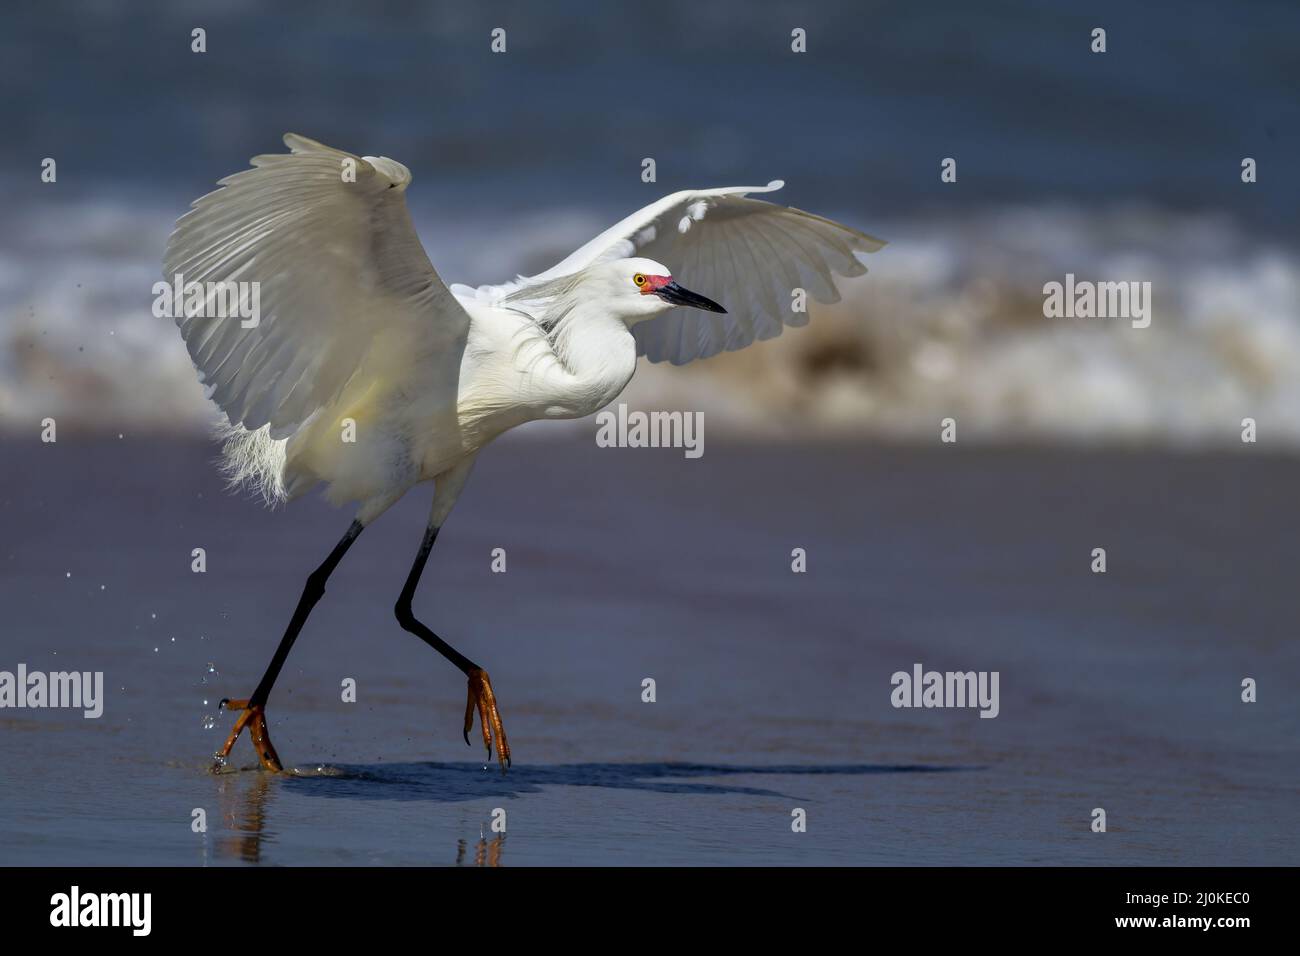 Egret flaps its wings while running. Stock Photo